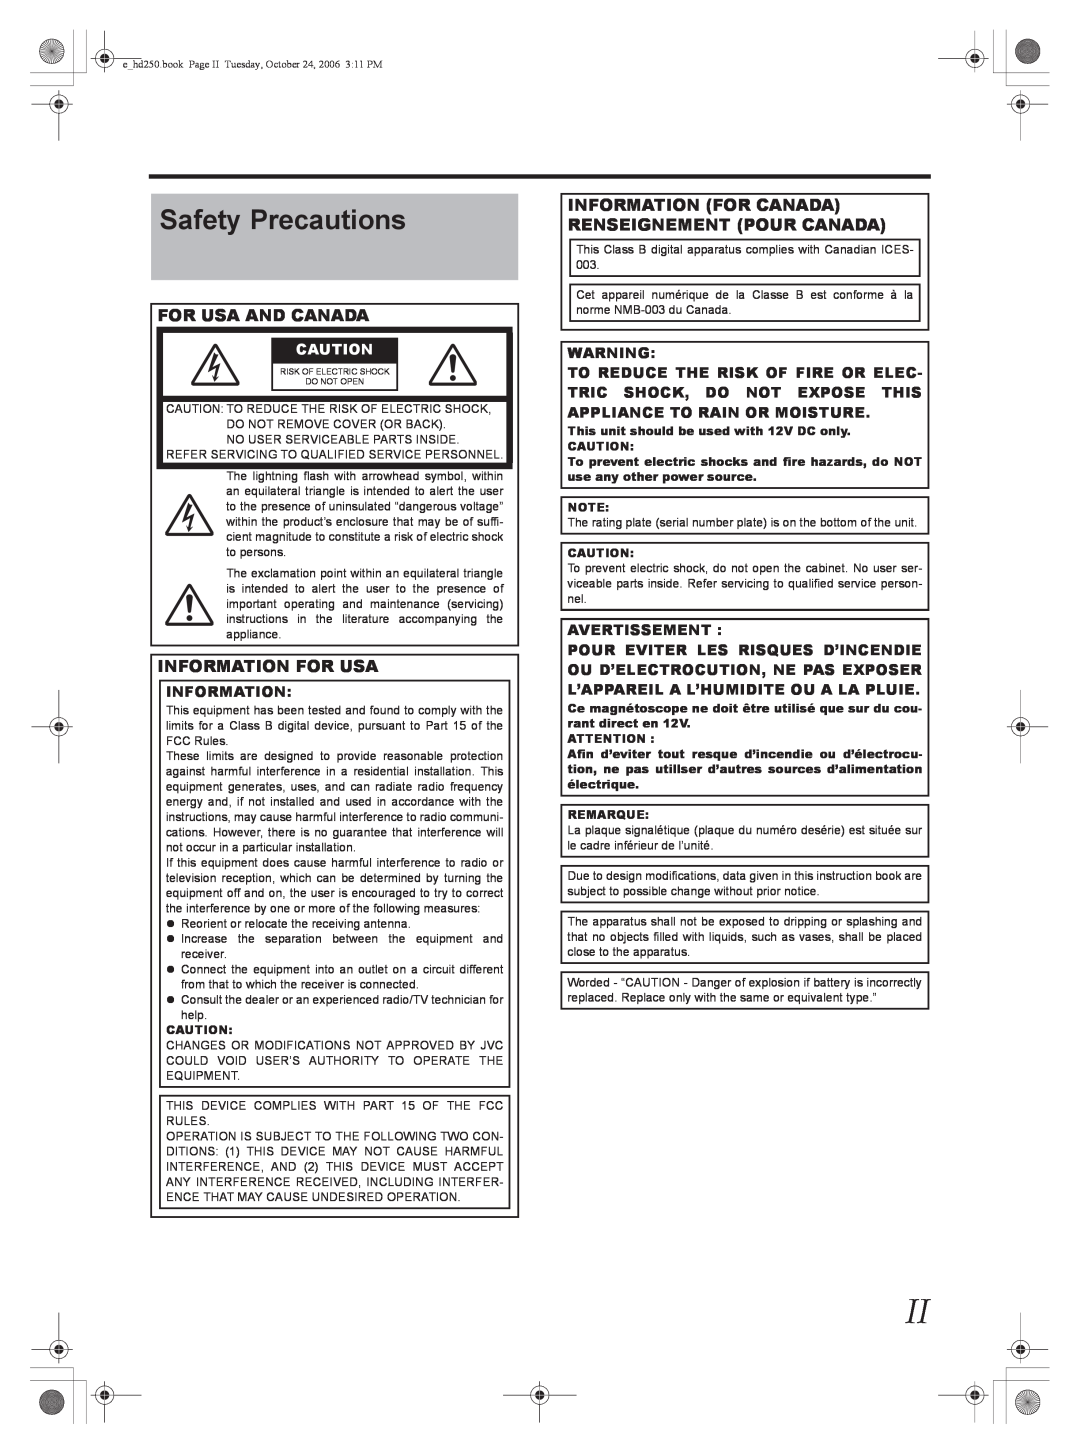 JVC GY-HD251, GY-HD250 manual Safety Precautions, For Usa And Canada, Information For Usa, Avertissement 